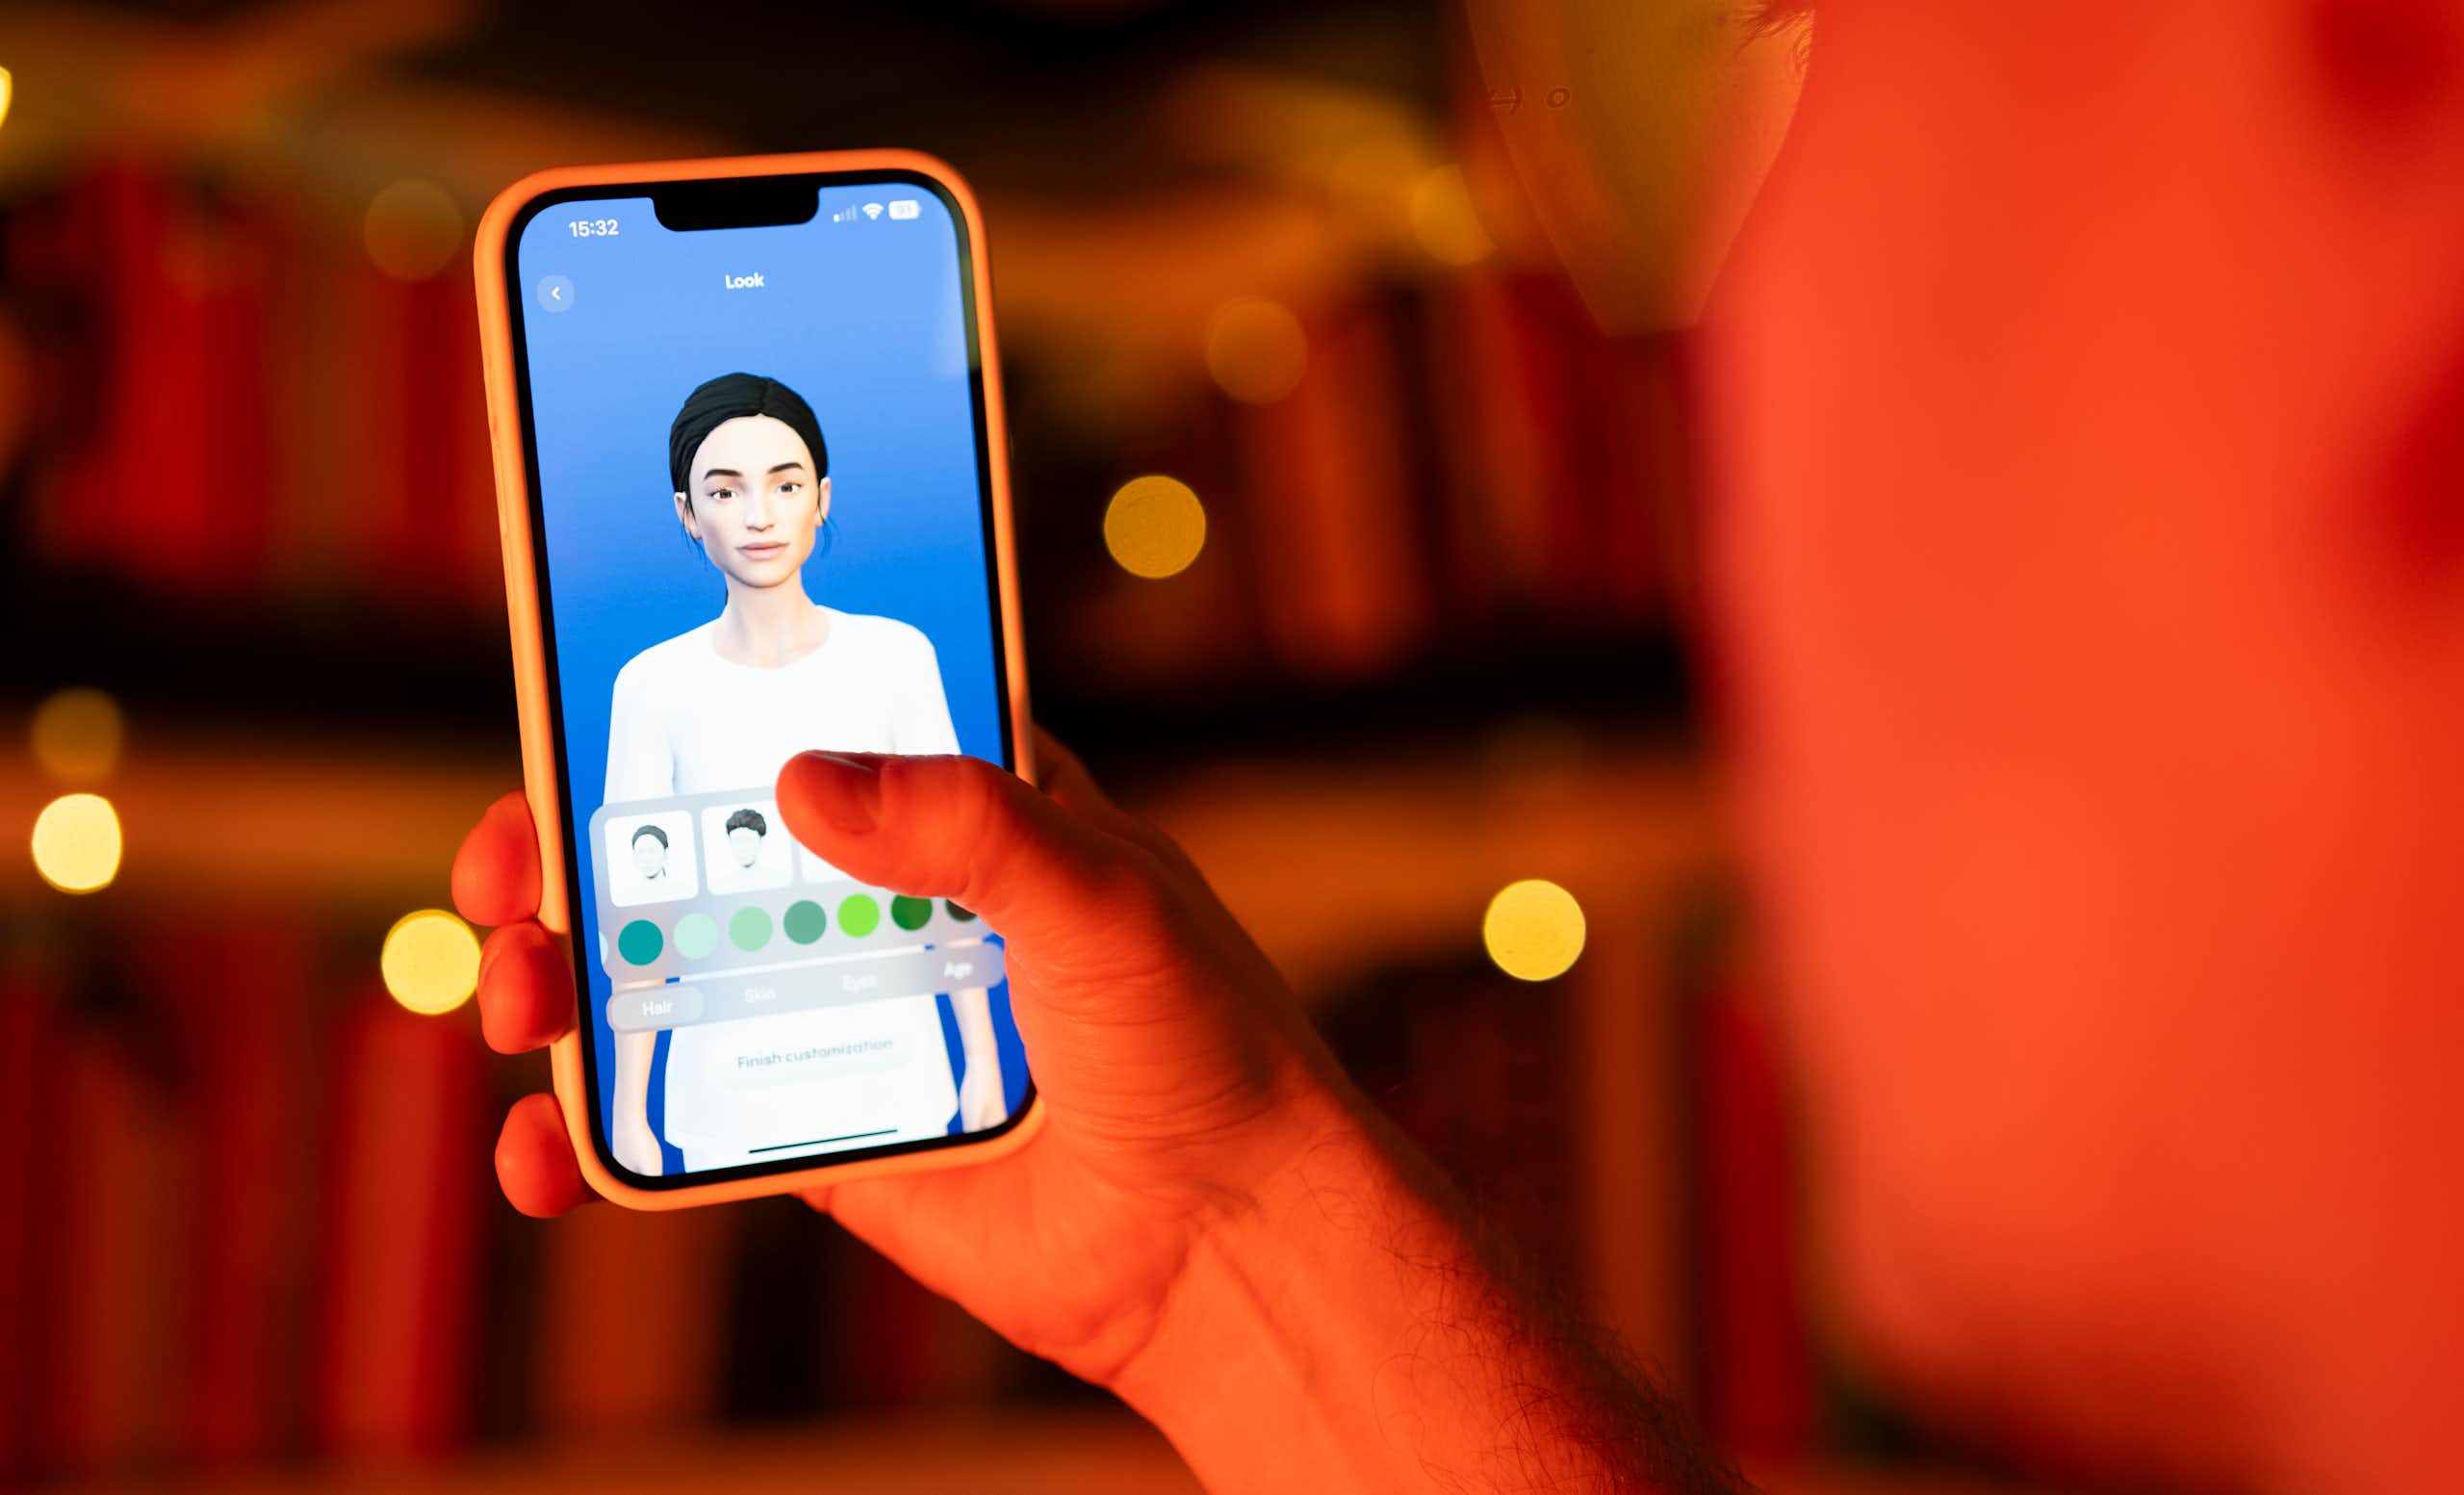  photo shows a user interacting with a smartphone app to customize an avatar for a personal artificial intelligence chatbot